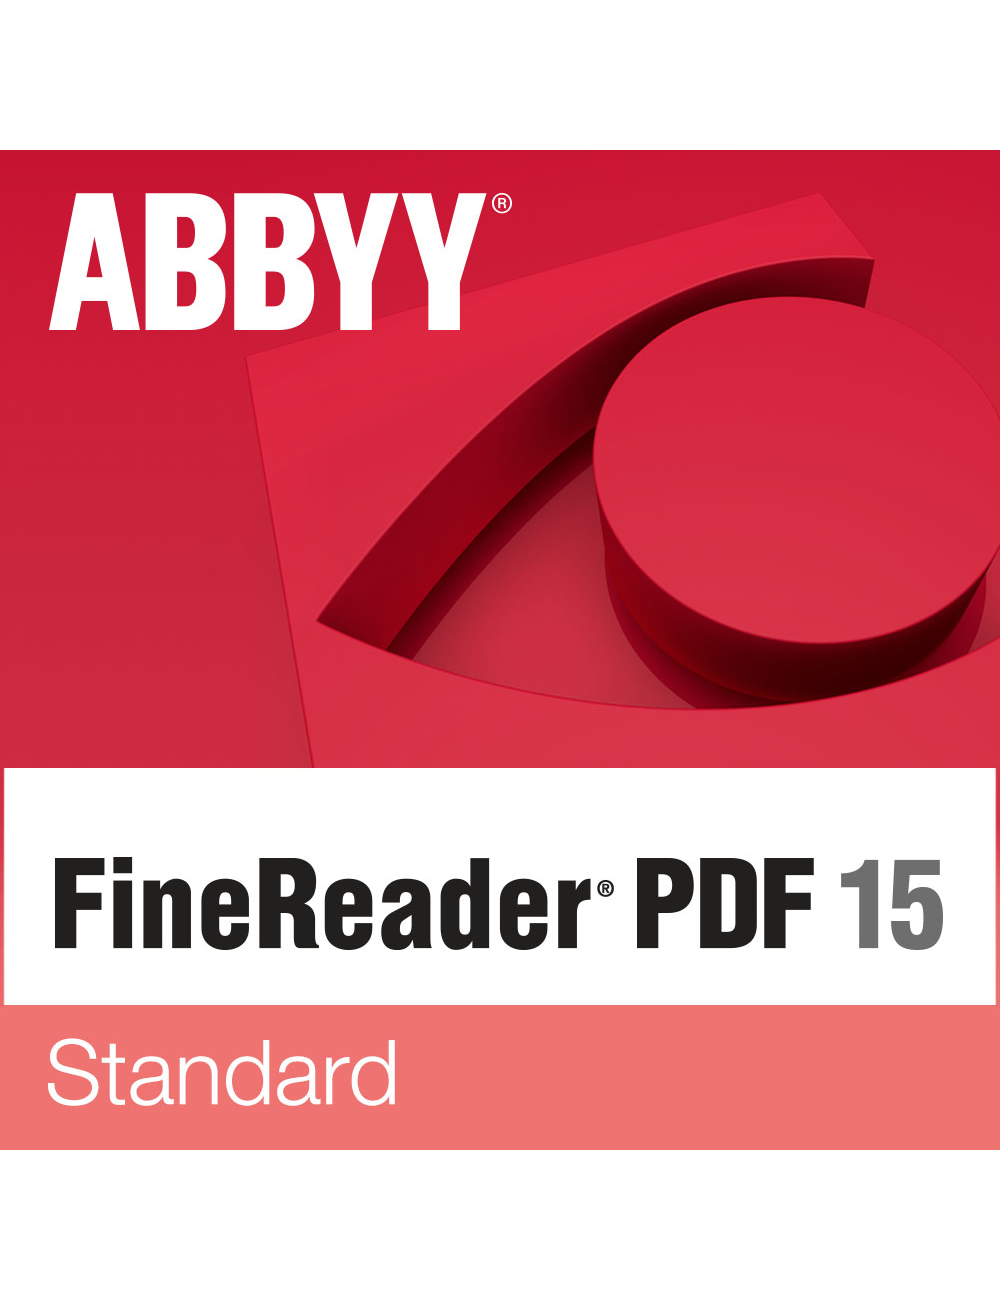 abbyy finereader pdf 15 corporate download